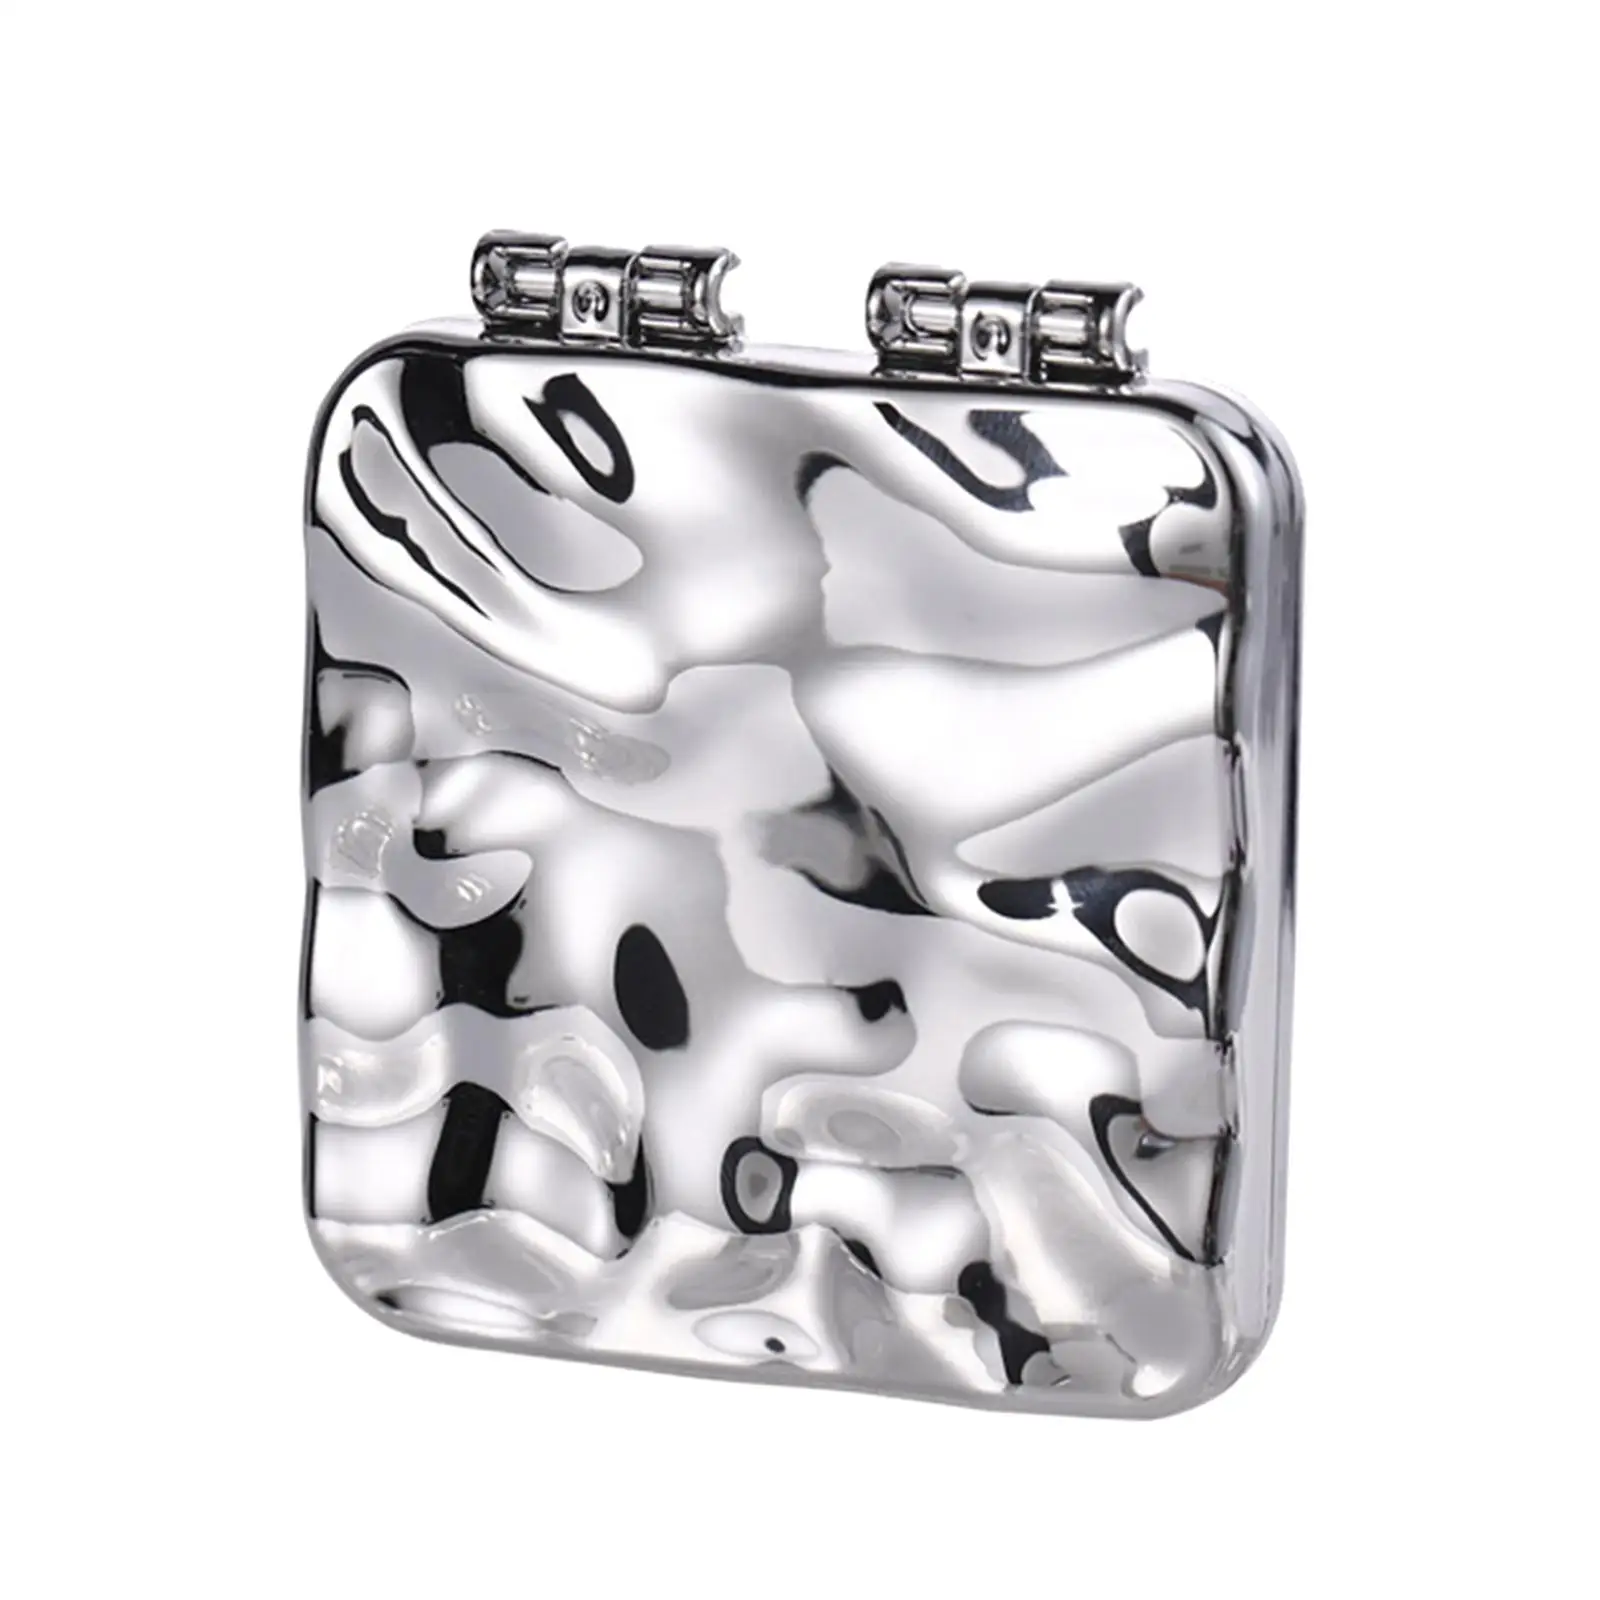 Compact Mirror Small Square Handbag Pocket Mirror for Work Daily Business